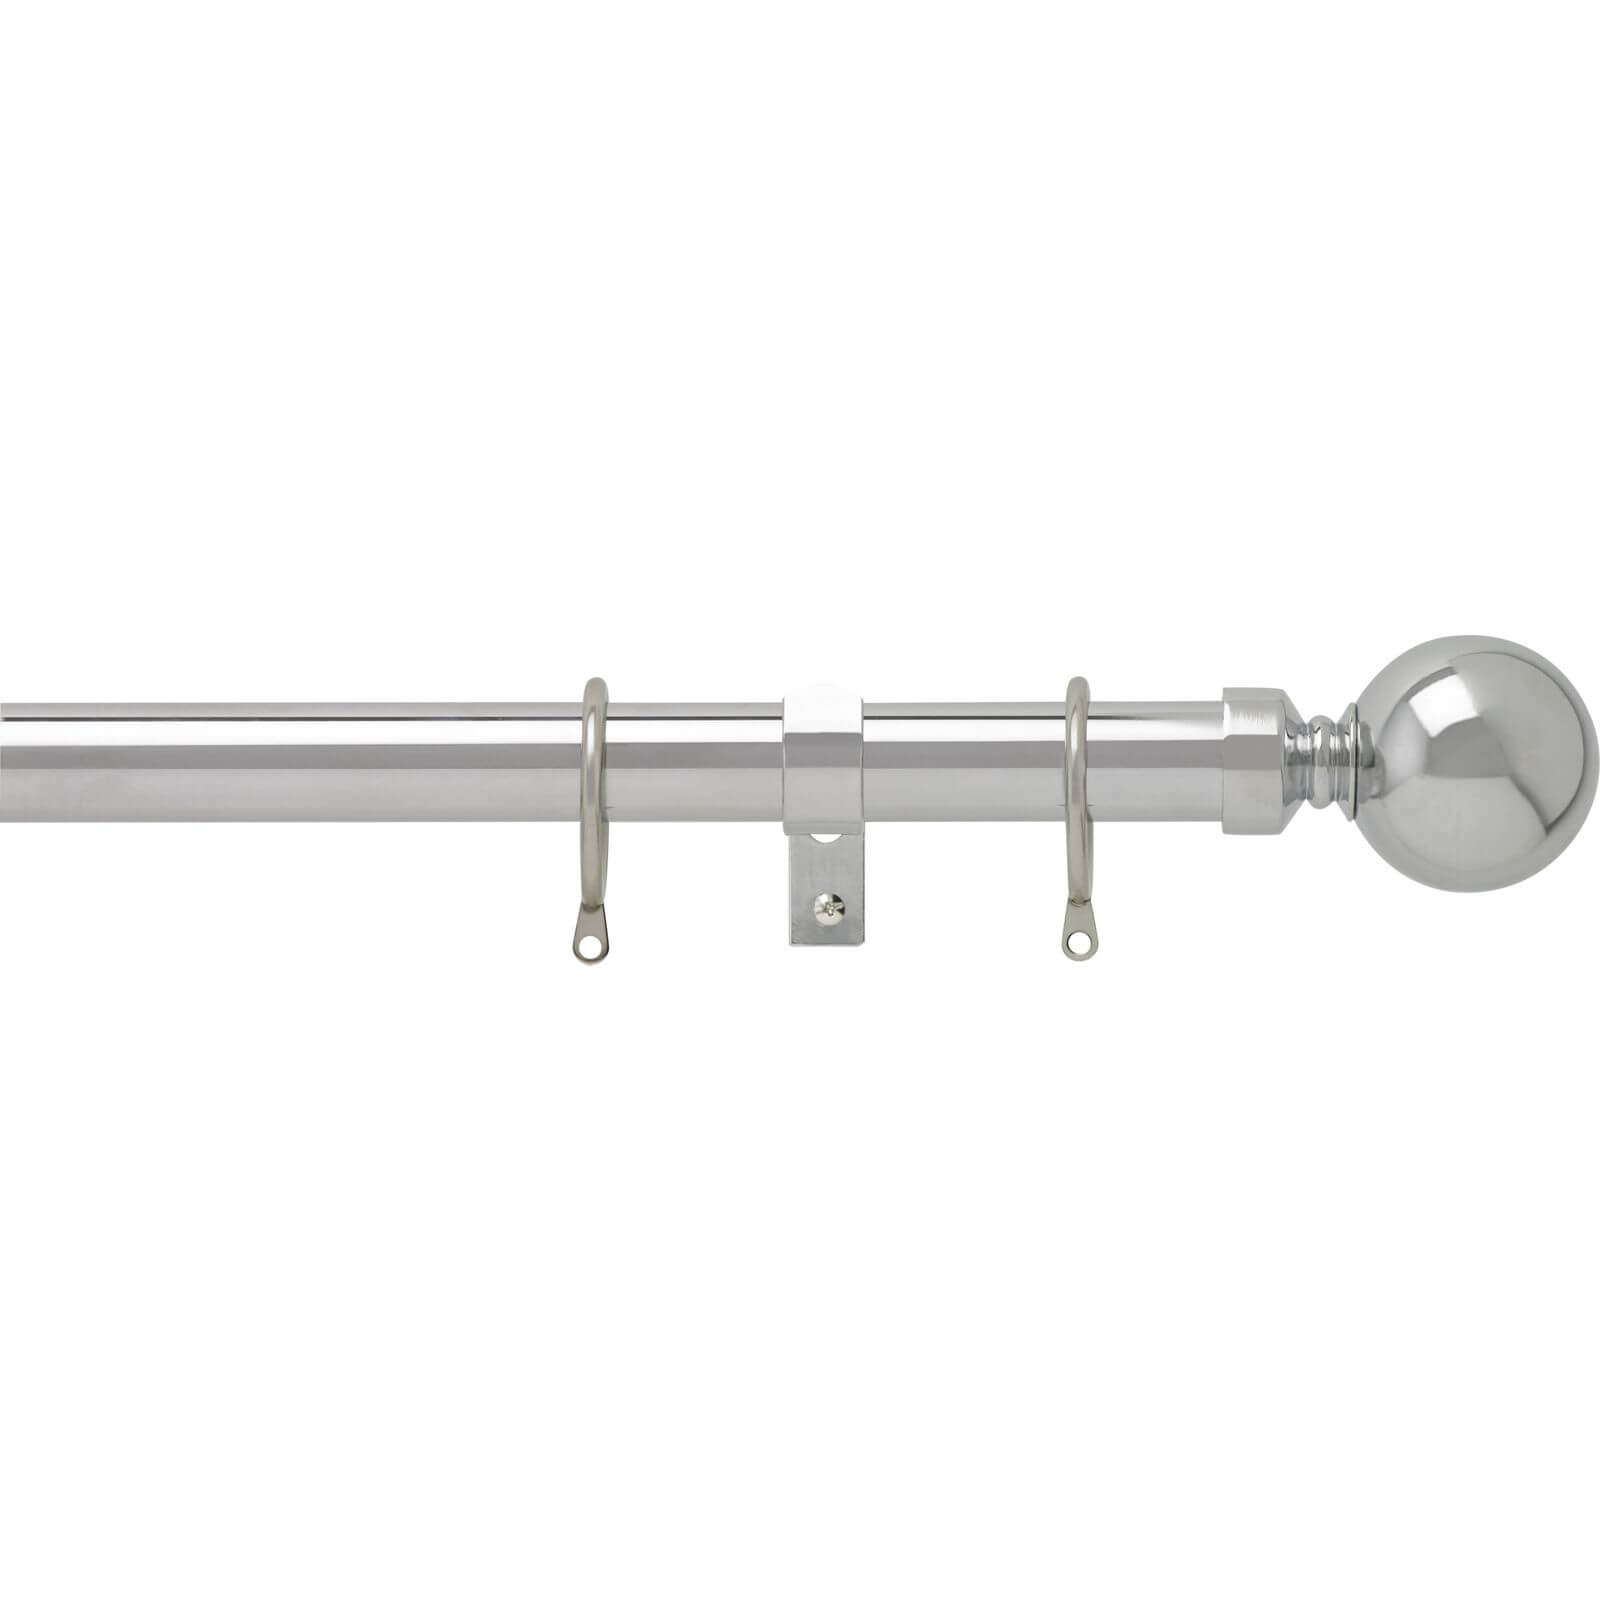 Chrome 28mm Fixed Curtain Pole With Ball 3m